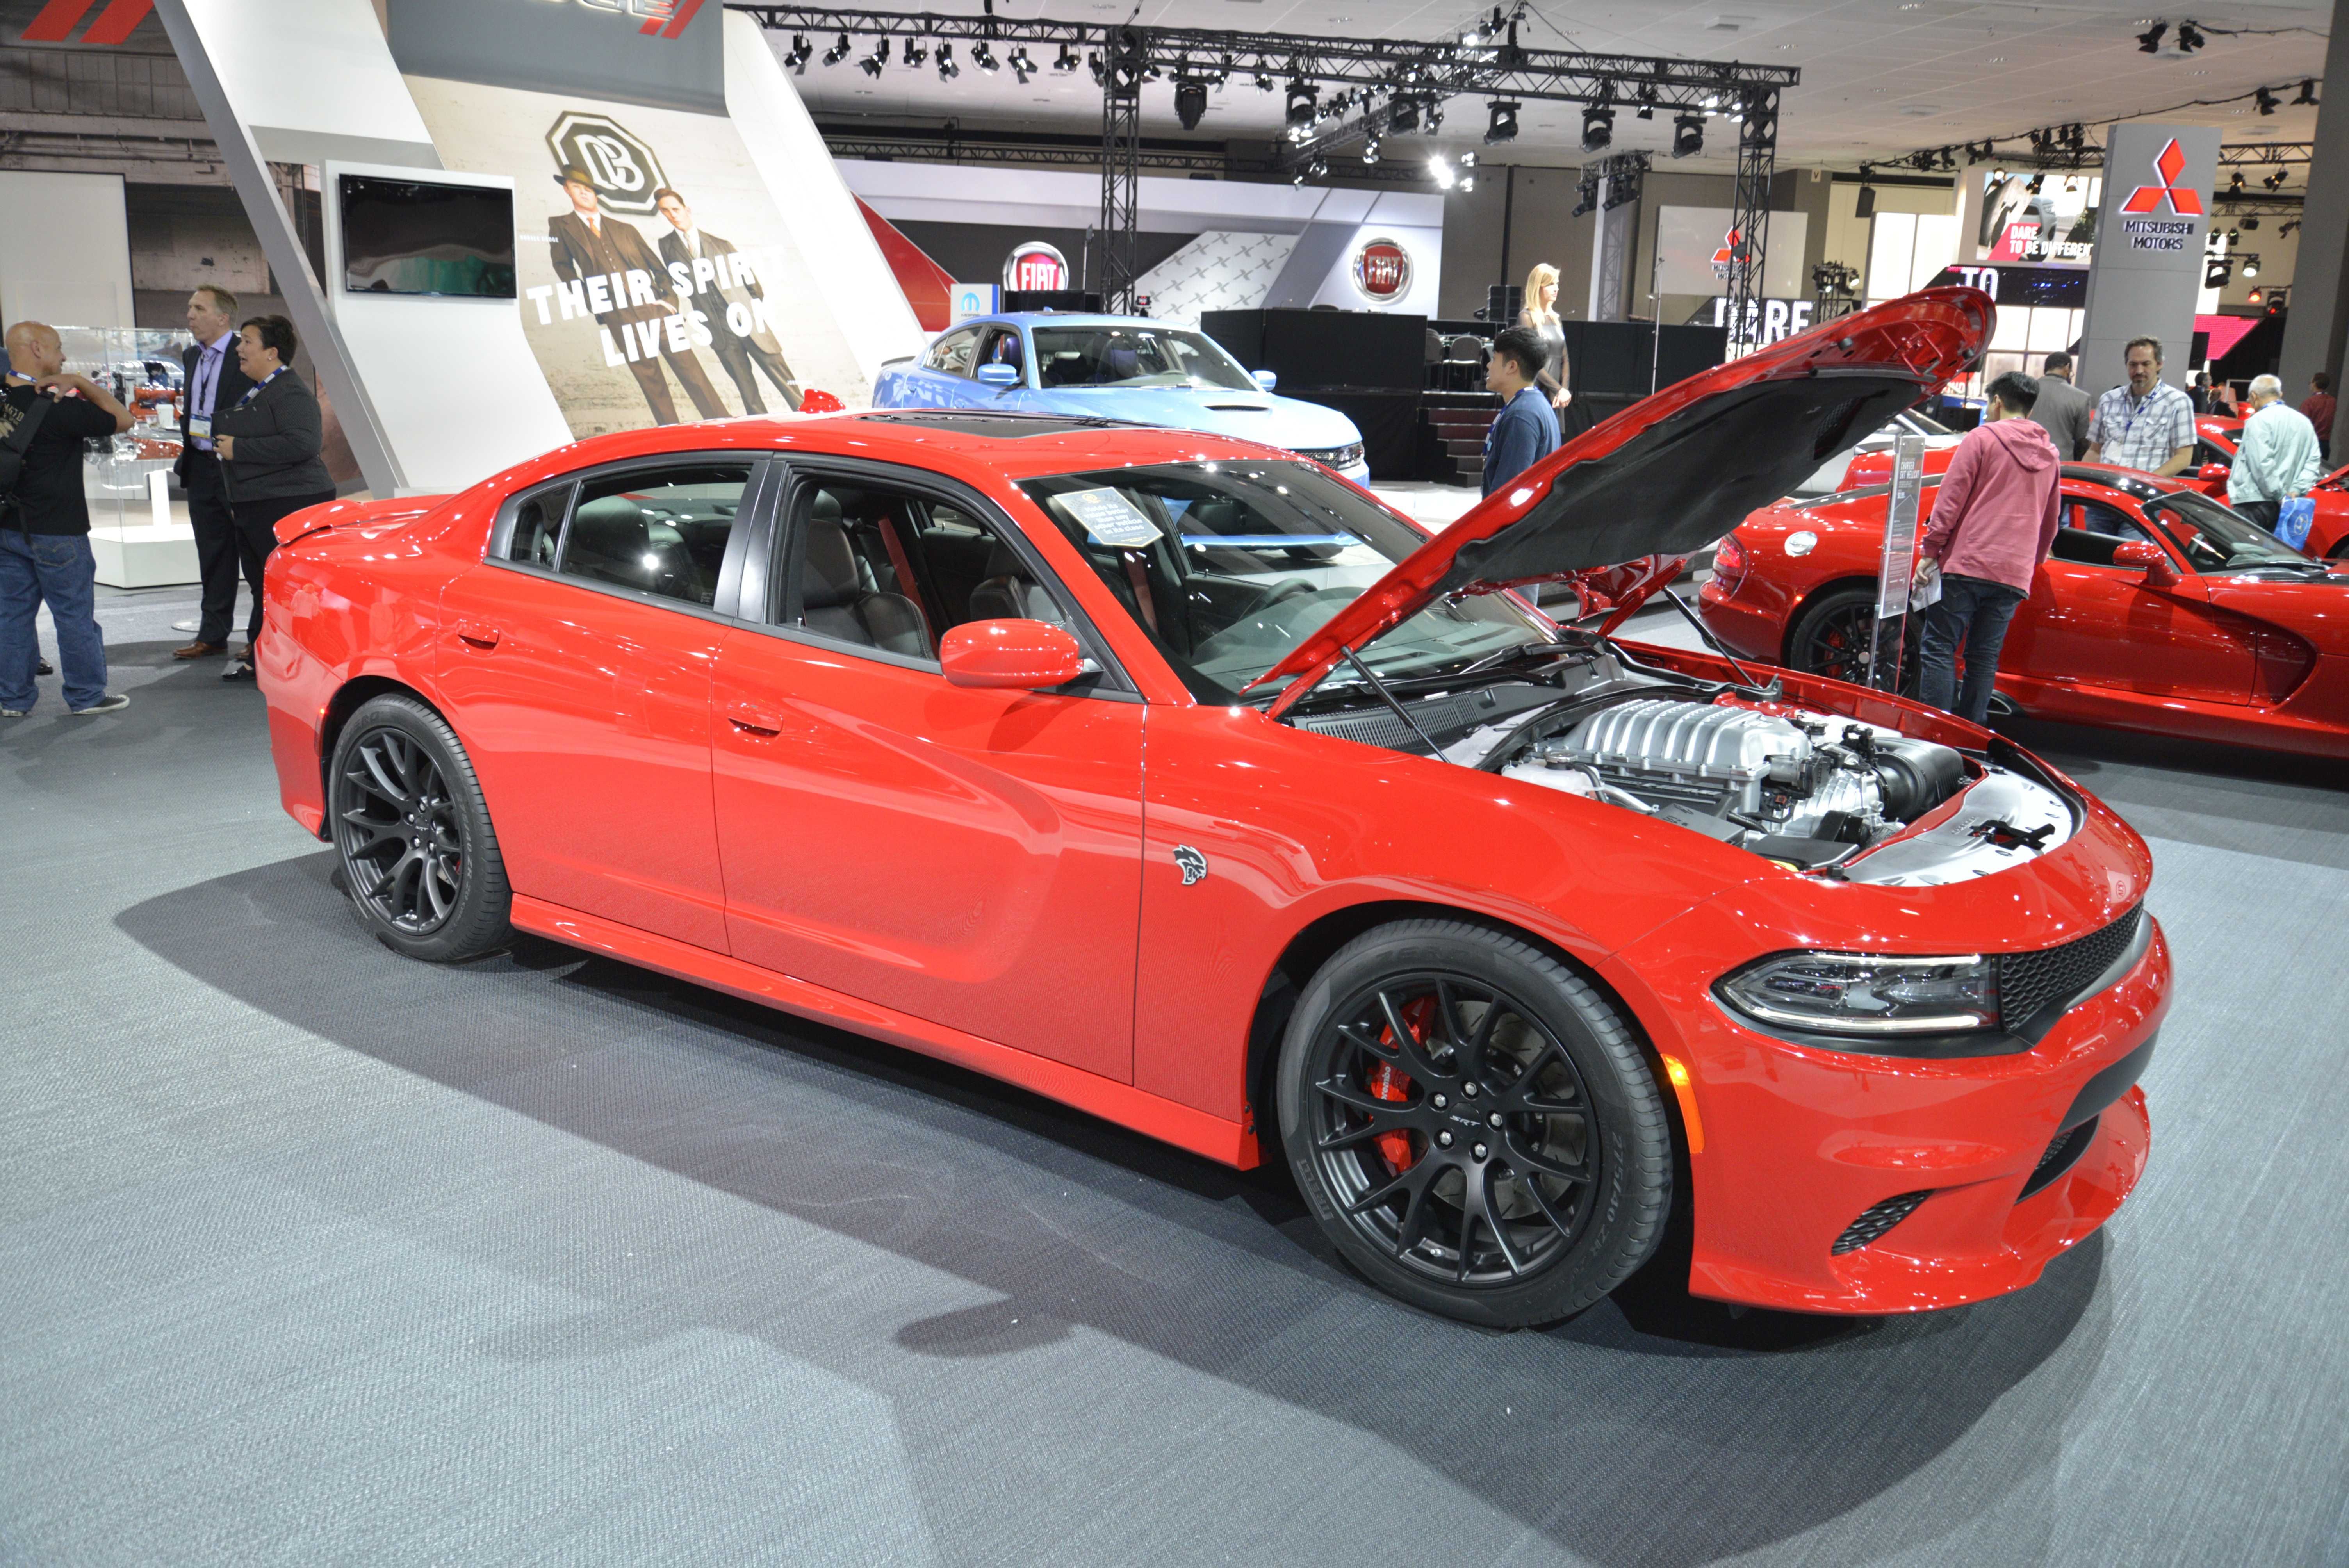 A Dodge Charger Hellcat on display.